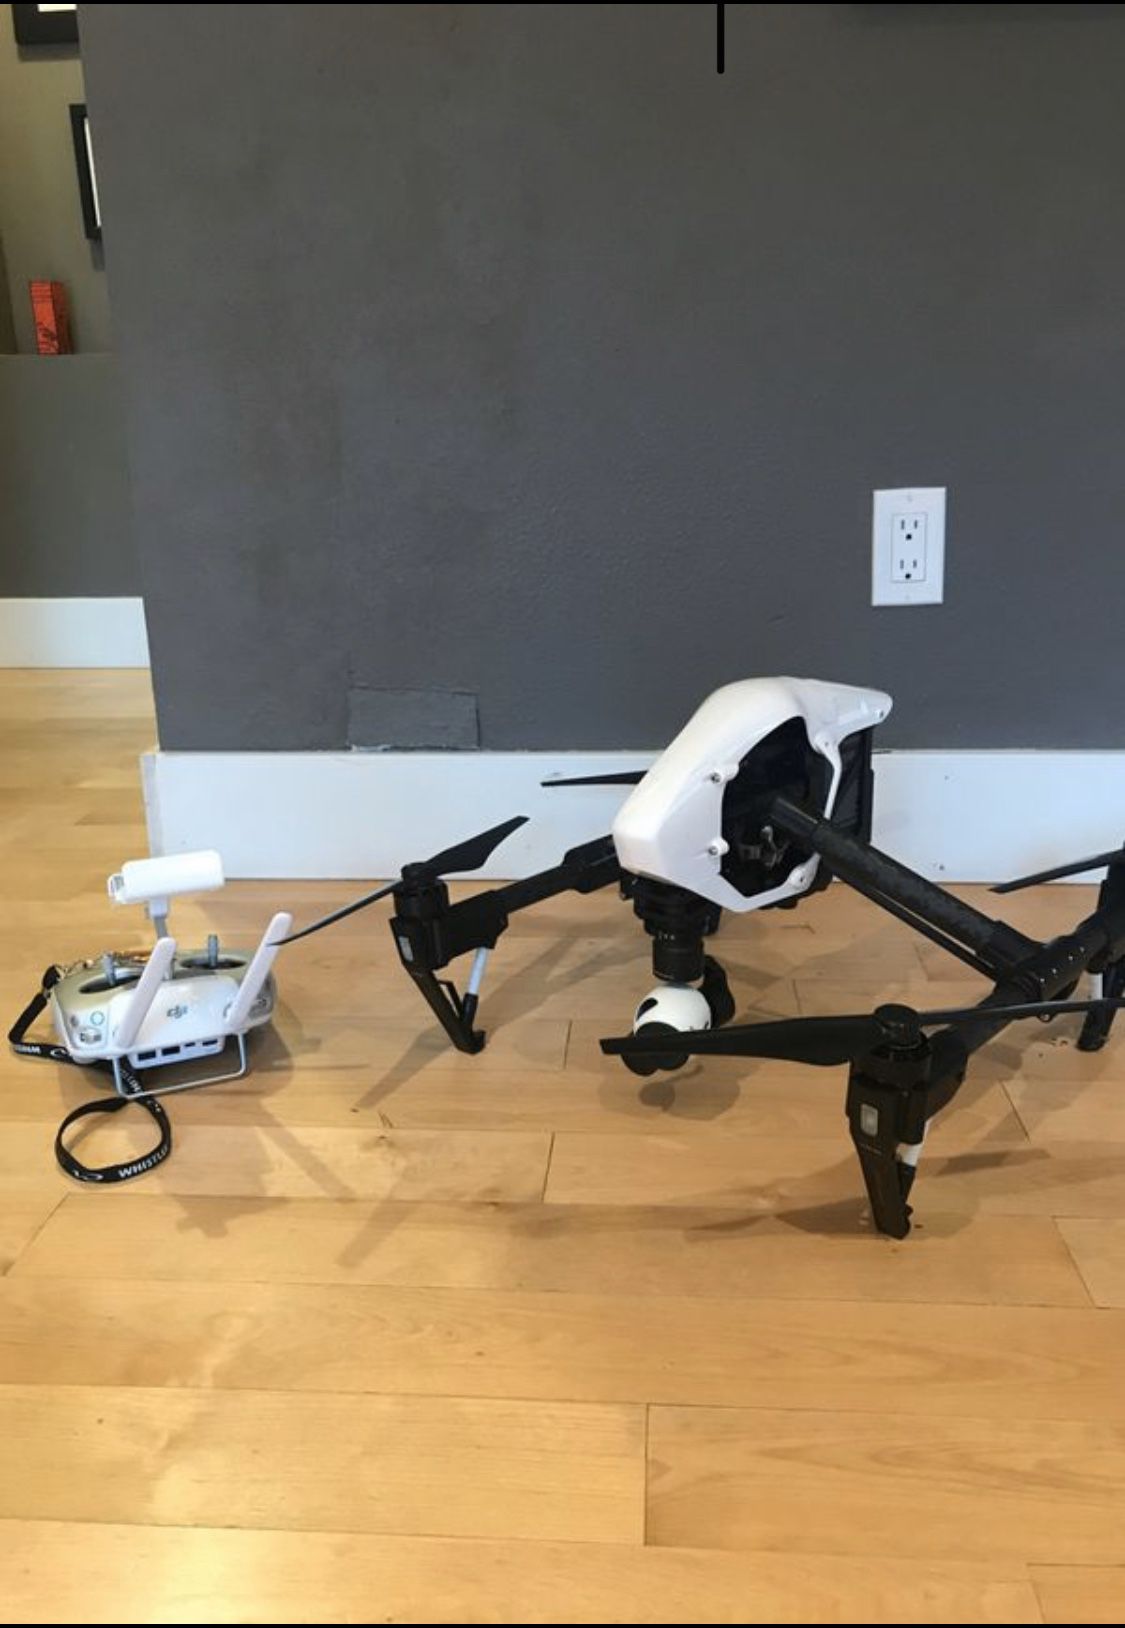 Brand new DJI inspire 1 for sale.. best drone for real estate videos..price negotiable as long as reasonable